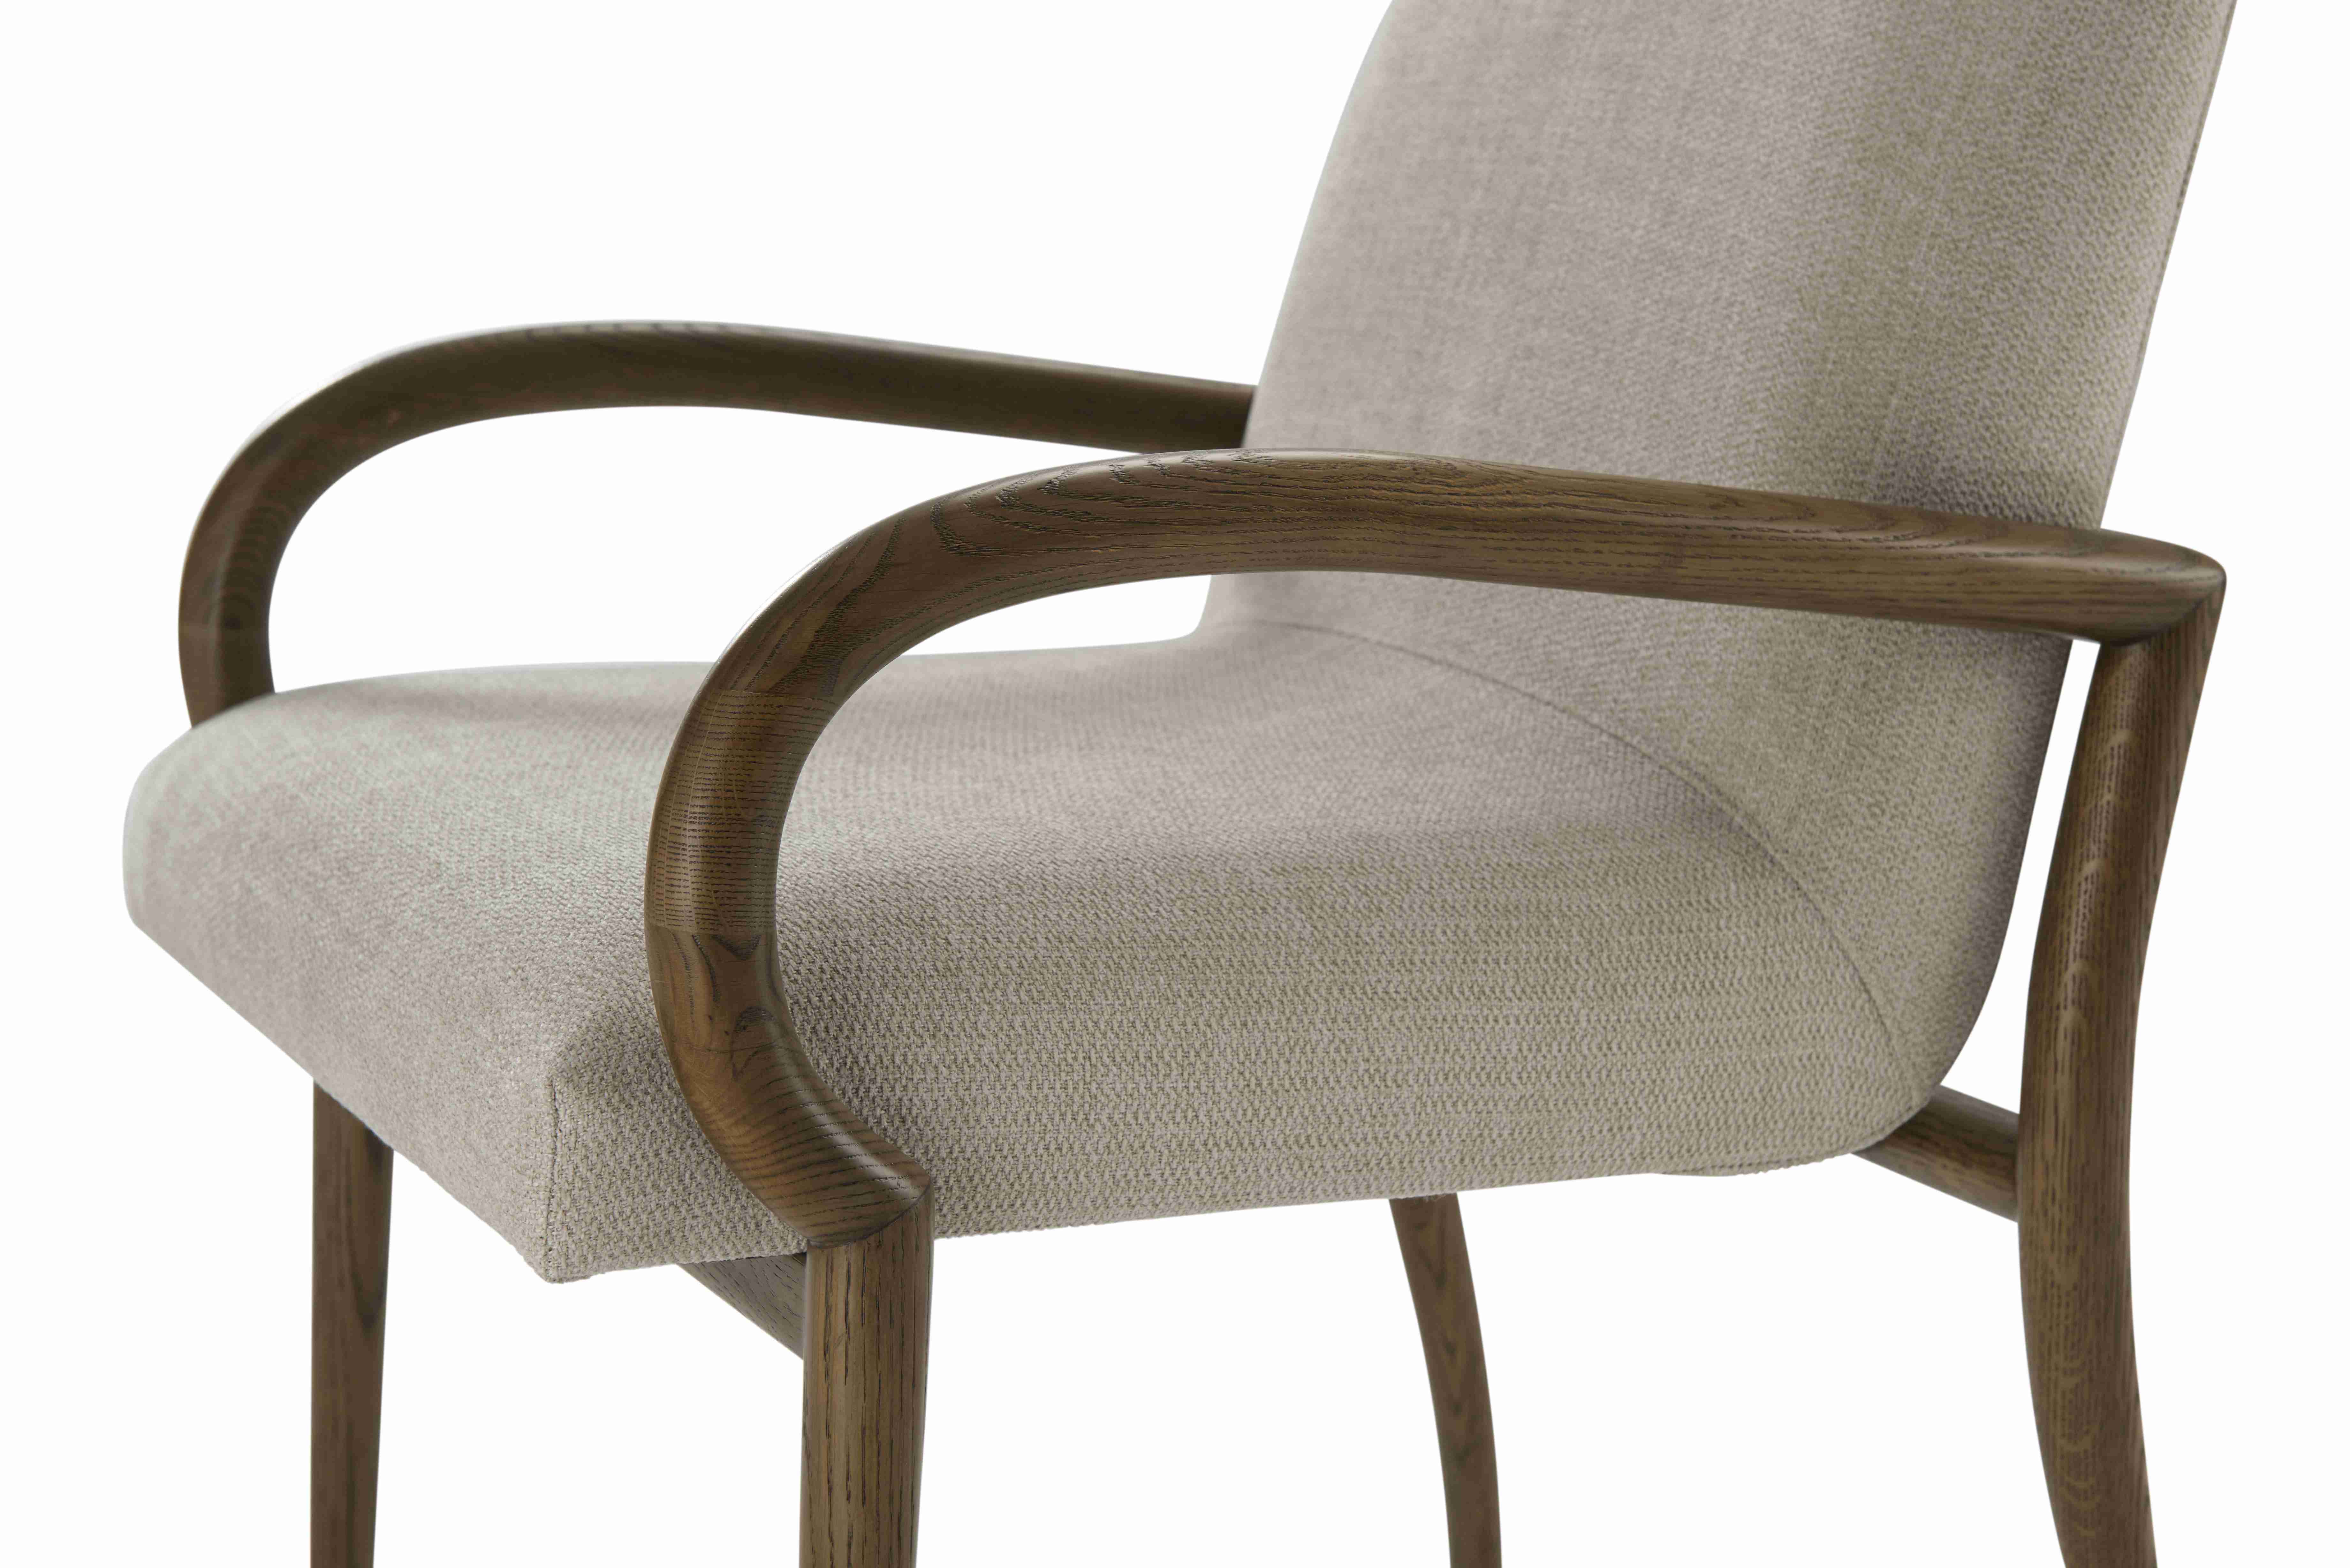 CATALINA DINING ARM CHAIR II